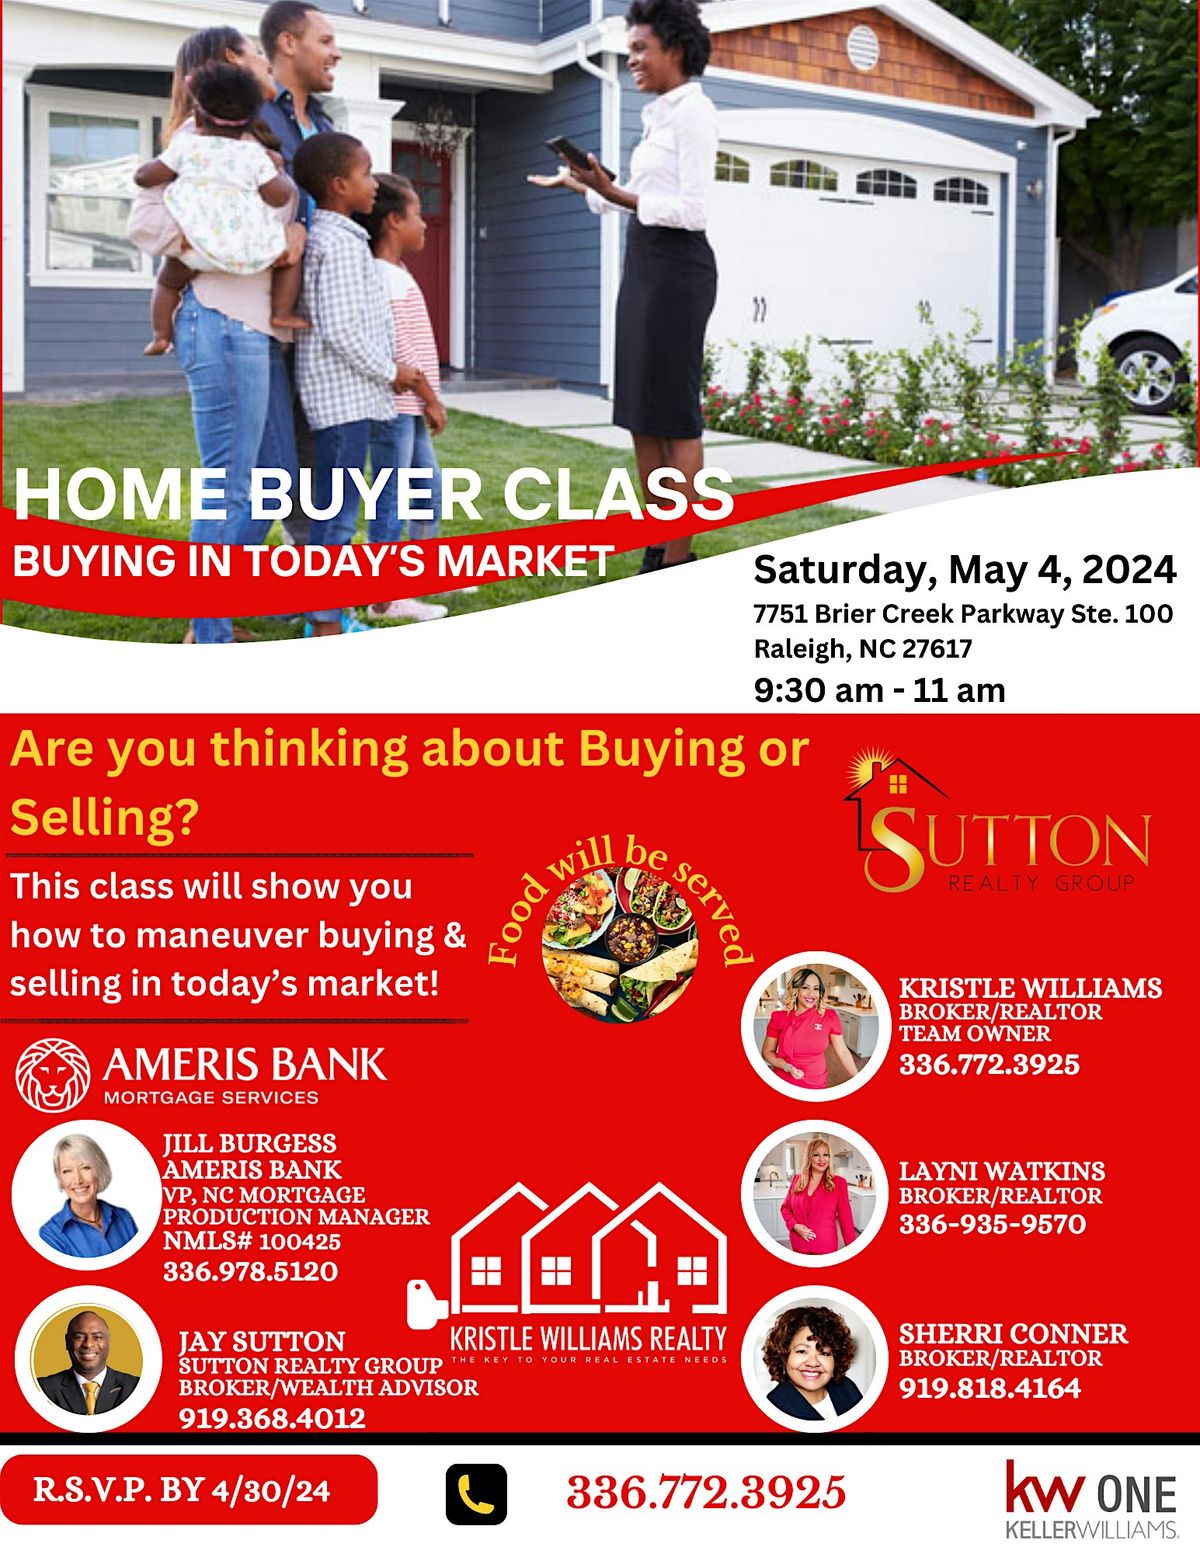 Buying in Today's Market- Home Buyer Class